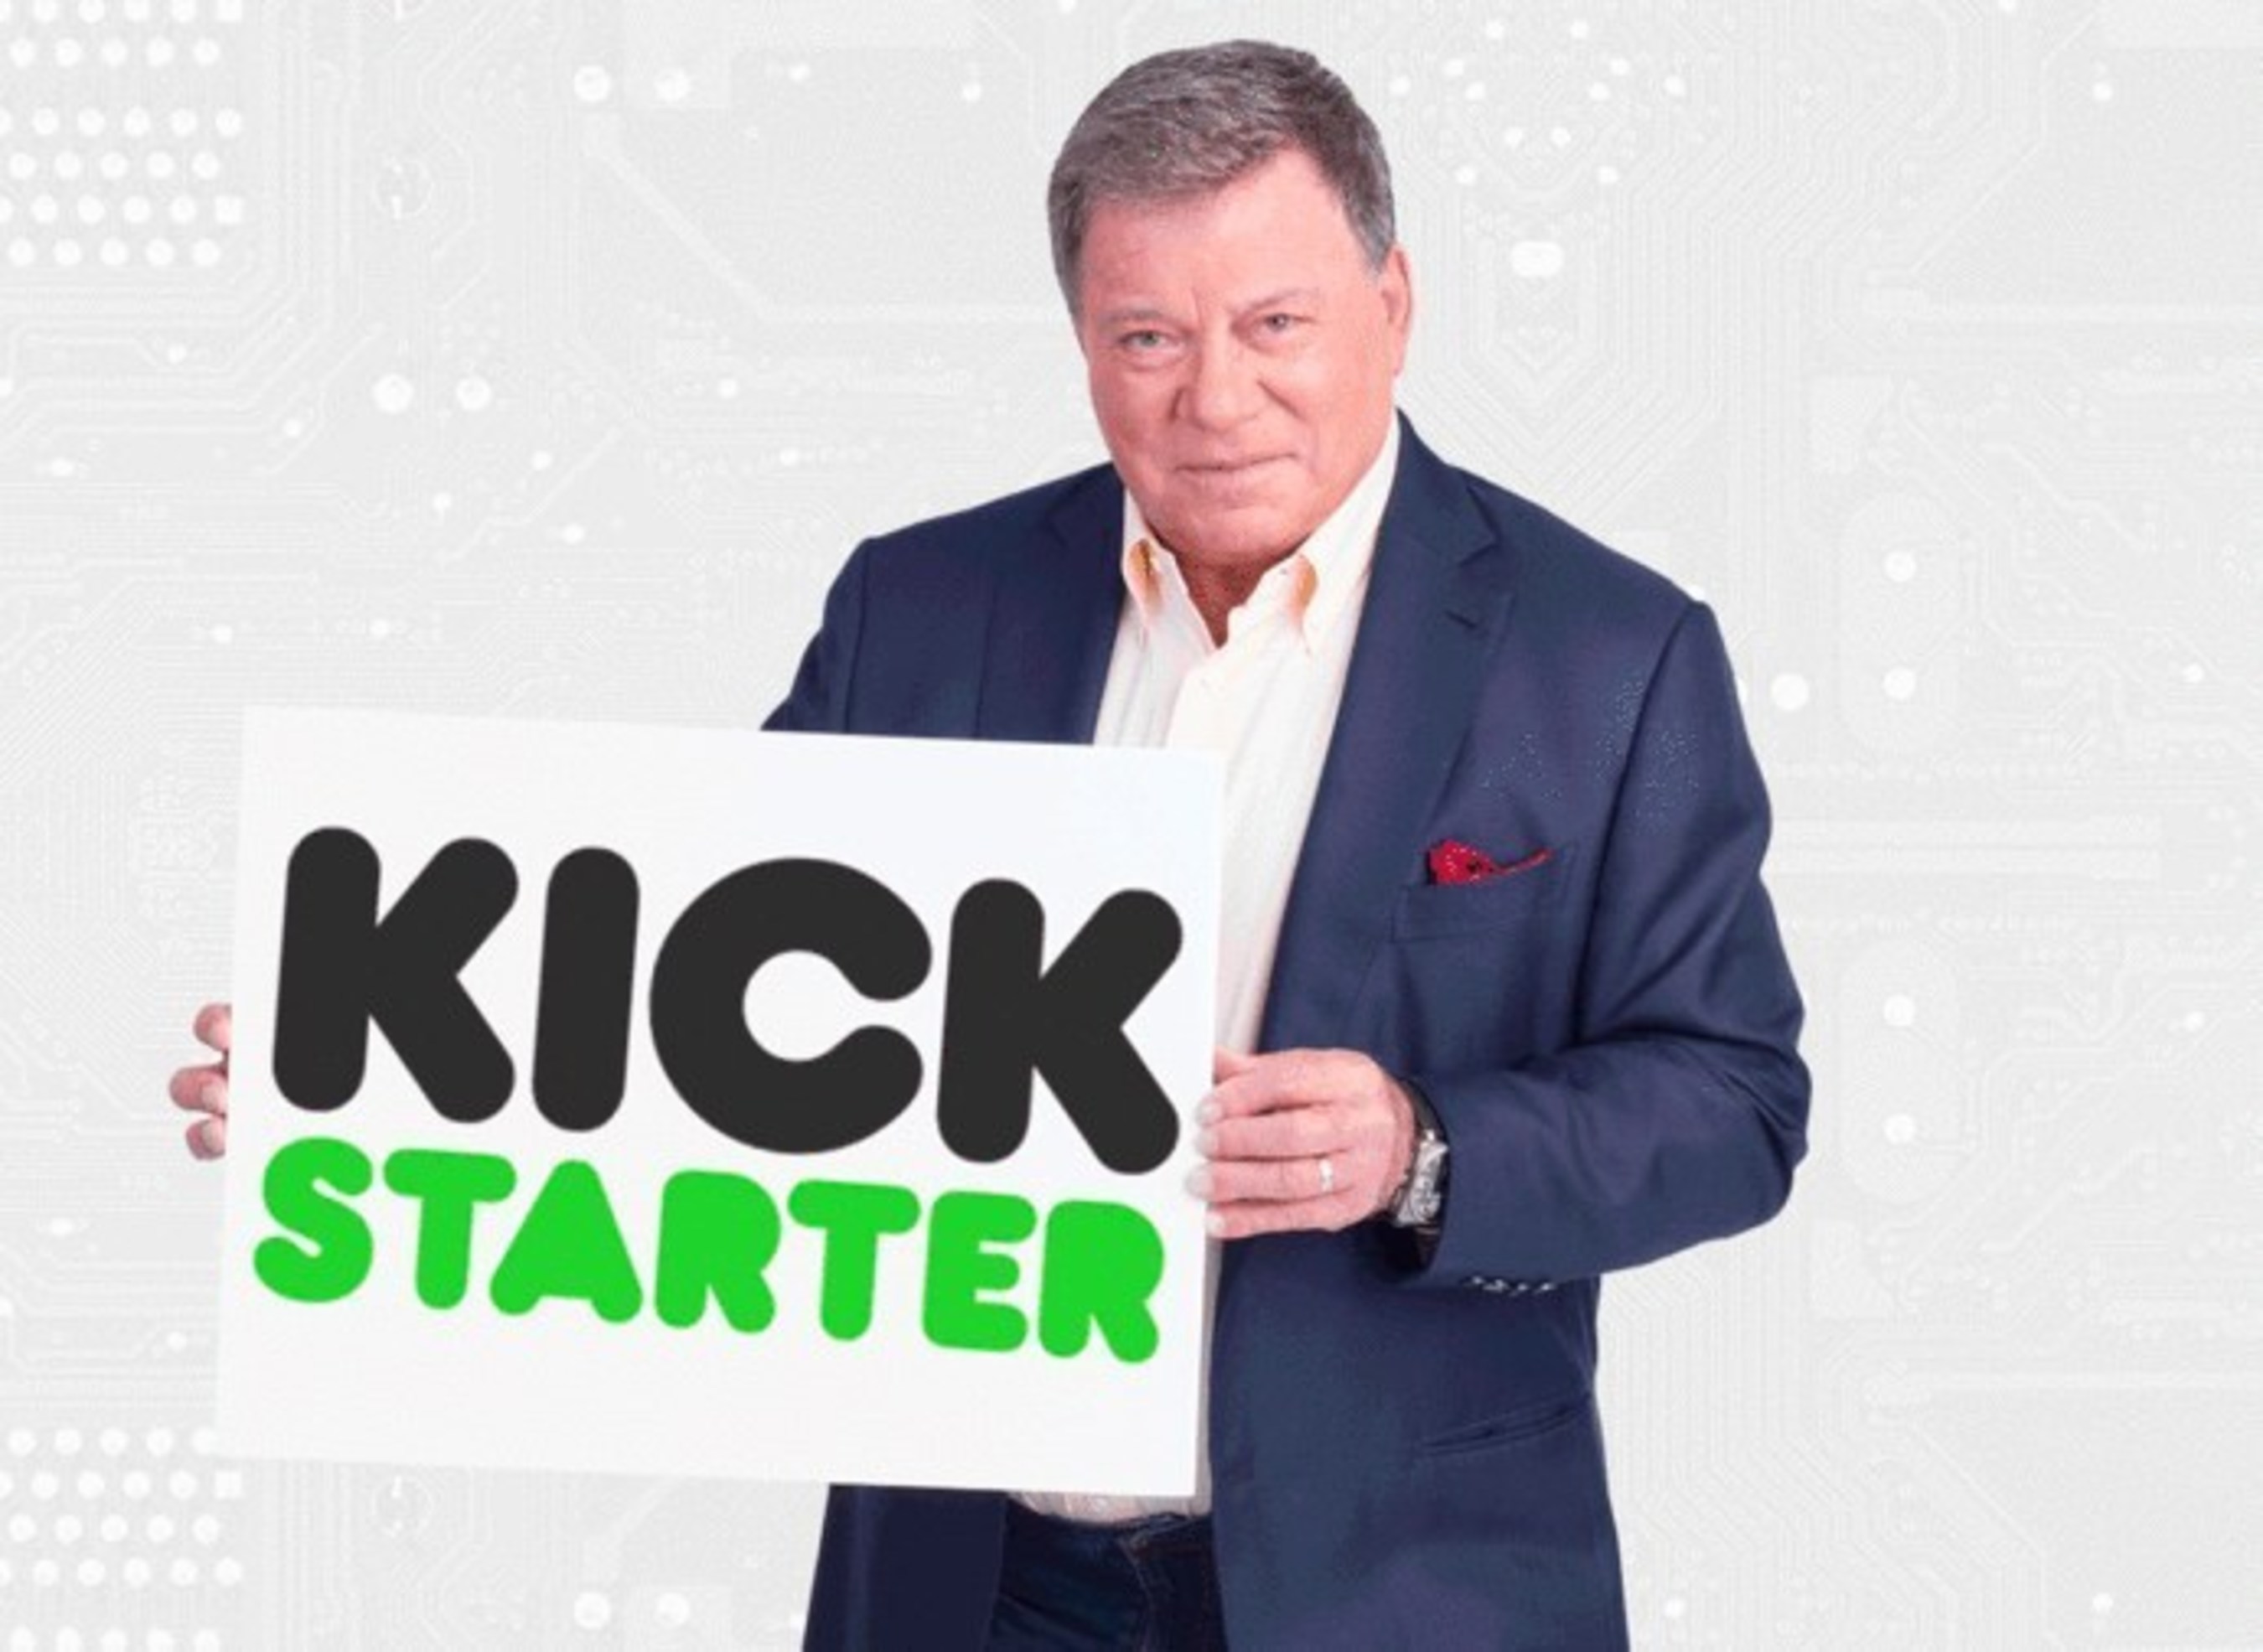 William Shatner Launches Kickstarter Project to Publish New Book "Catch Me Up". The book teaches seniors how to leverage their life experience through the use of new technology.